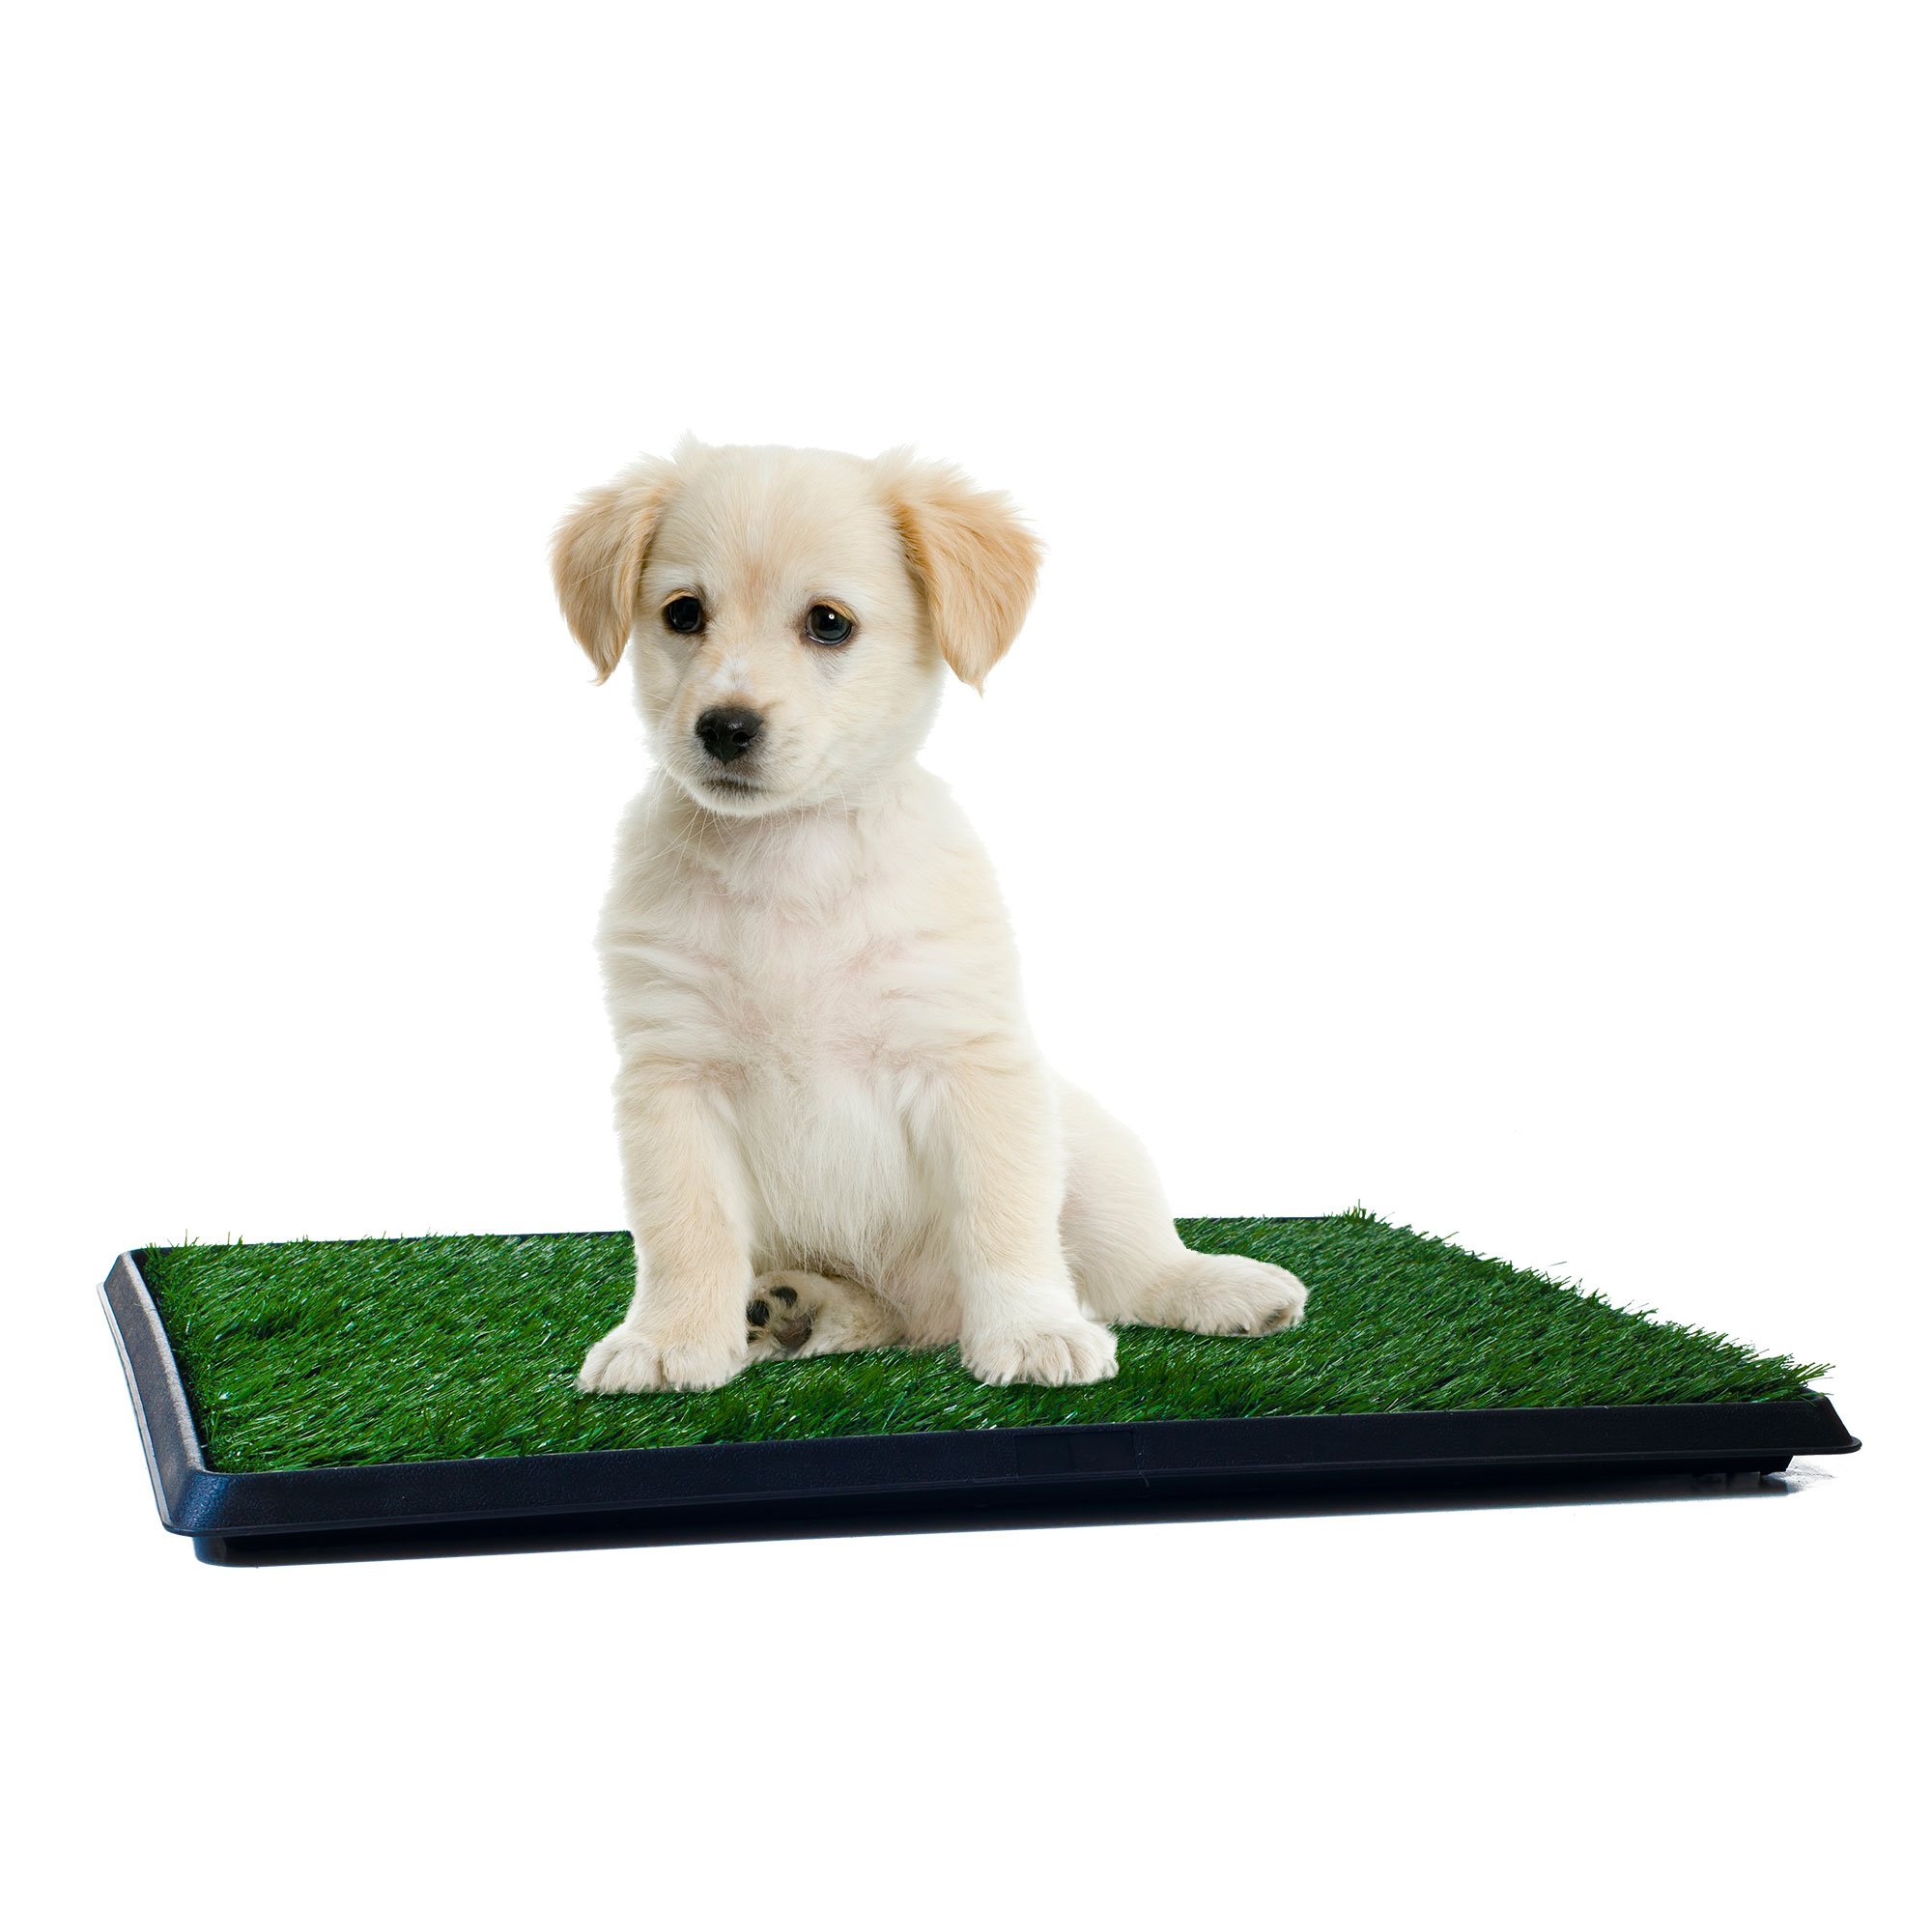 Book Cover Artificial Grass Puppy Pad for Dogs and Small Pets â€“ Portable Training Pad with Tray â€“ Dog Housebreaking Supplies by PETMAKER